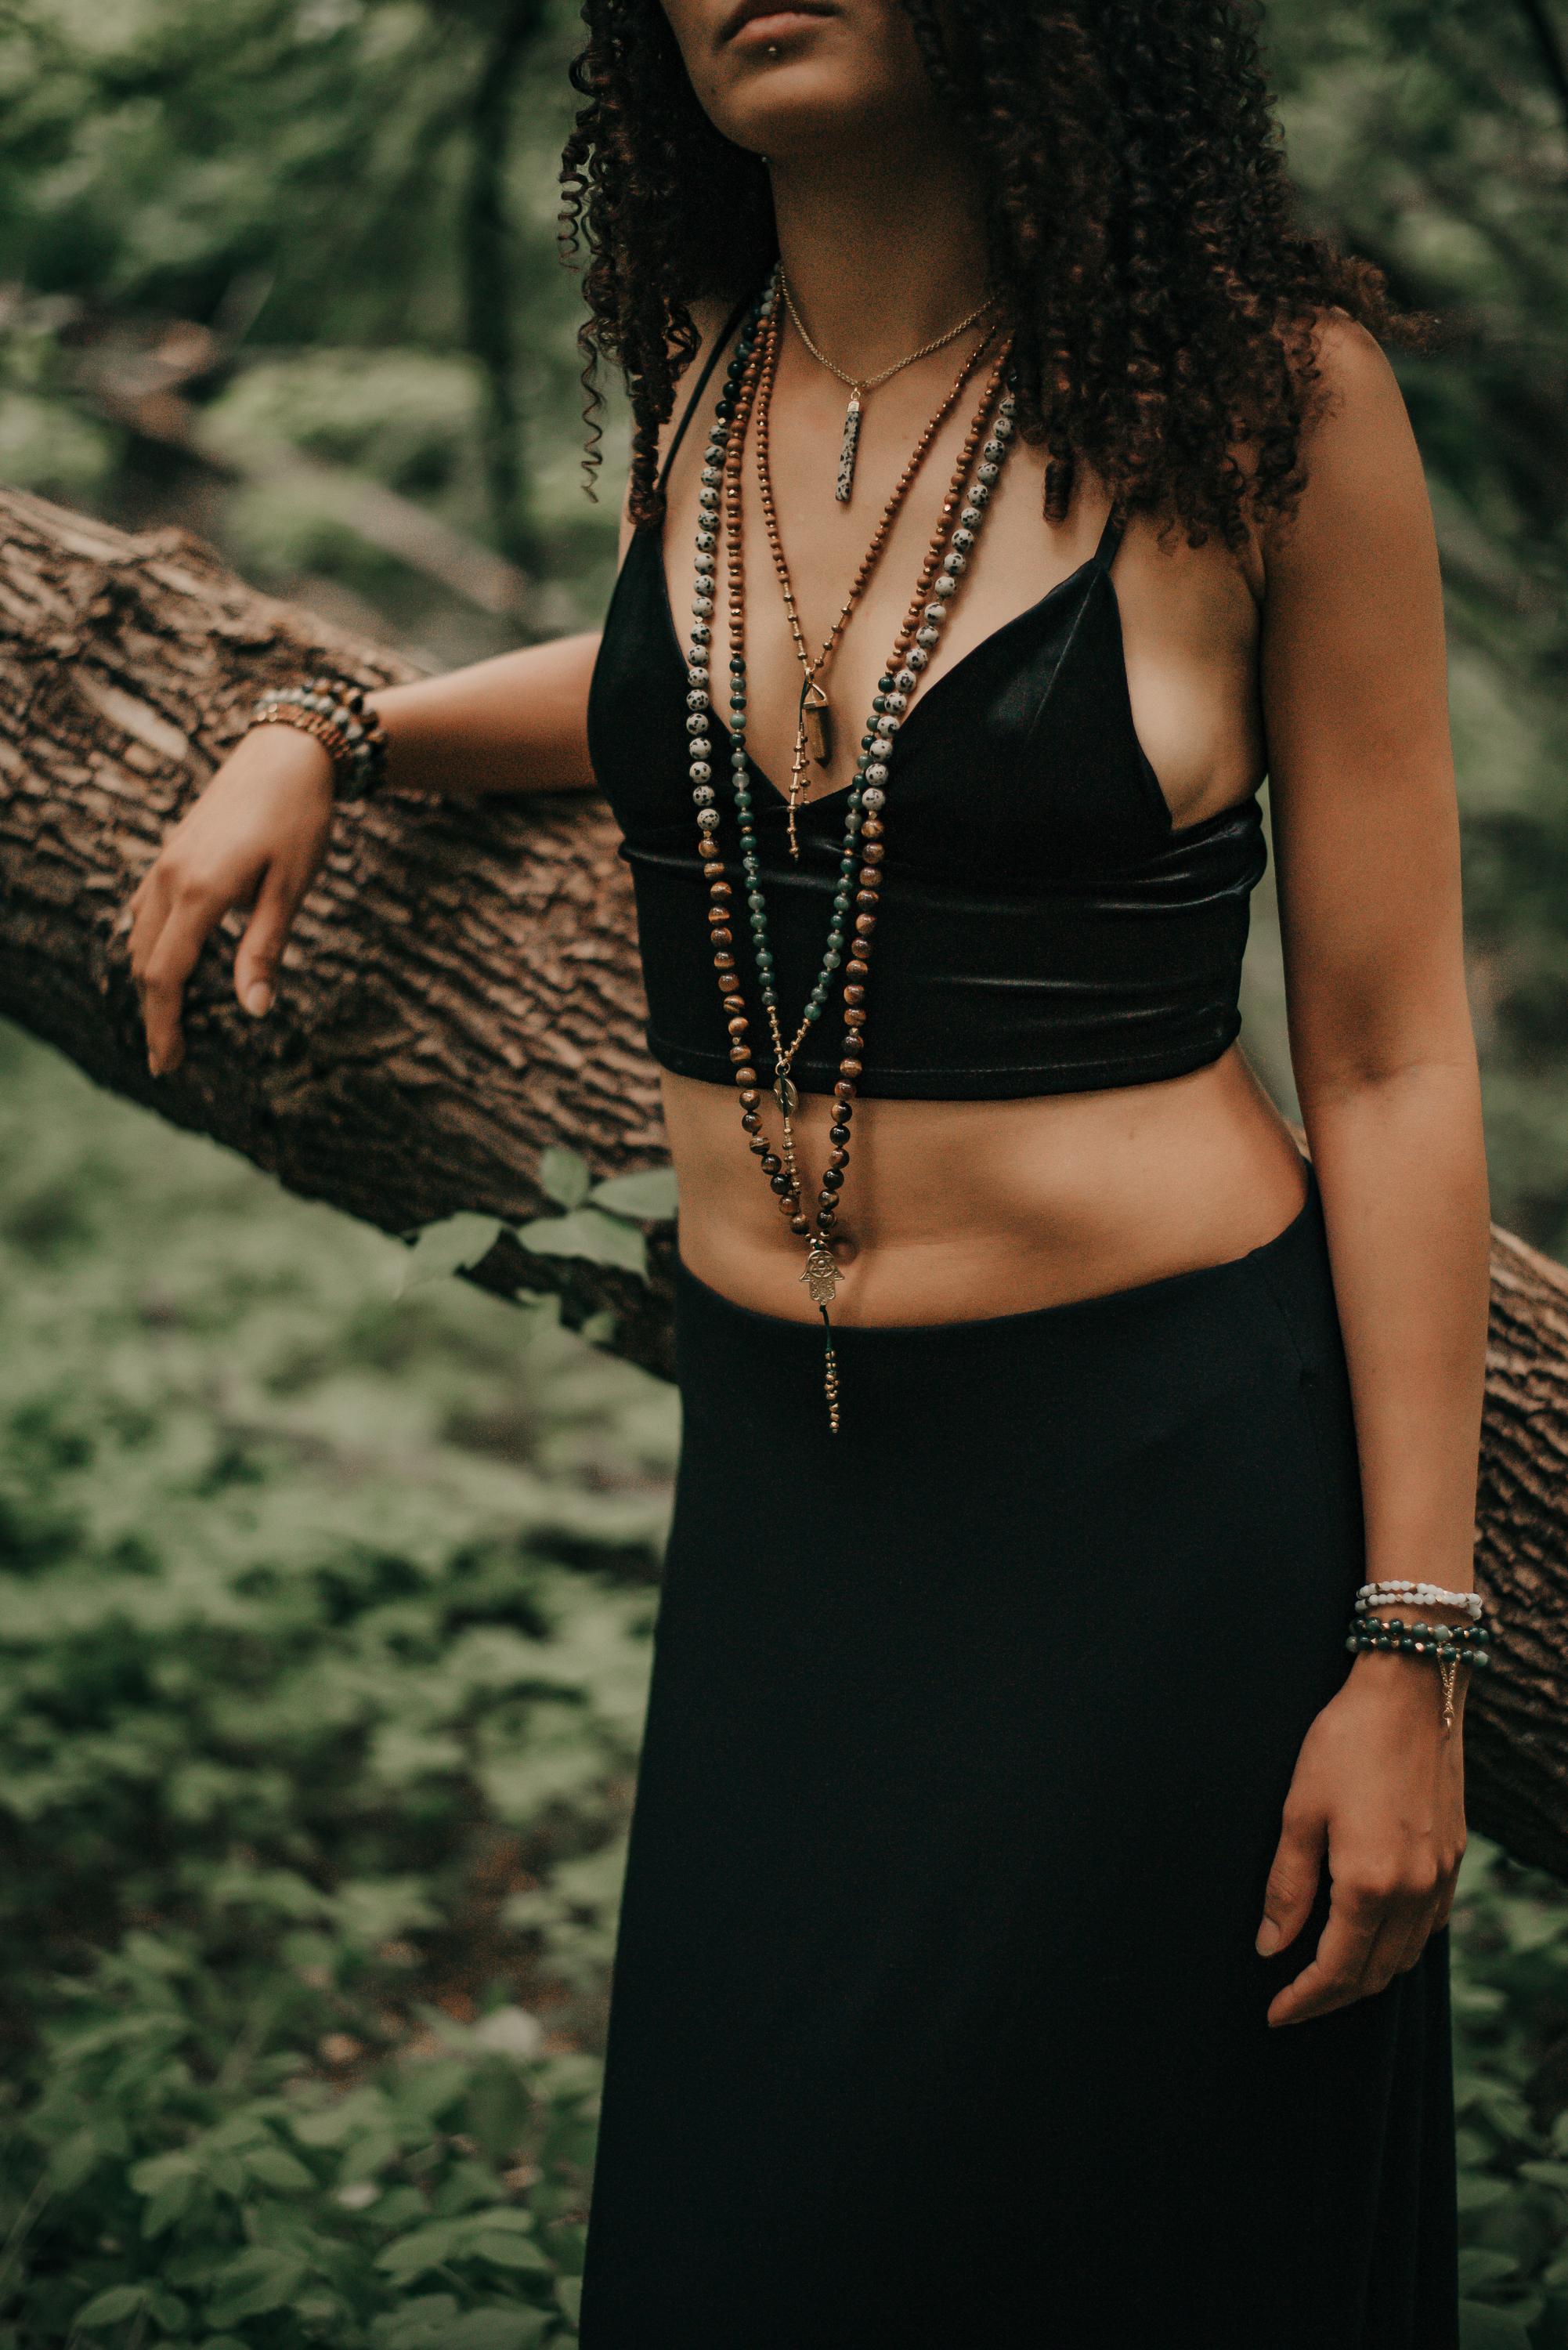 The Dryad Collection - Forest Bathing Mala